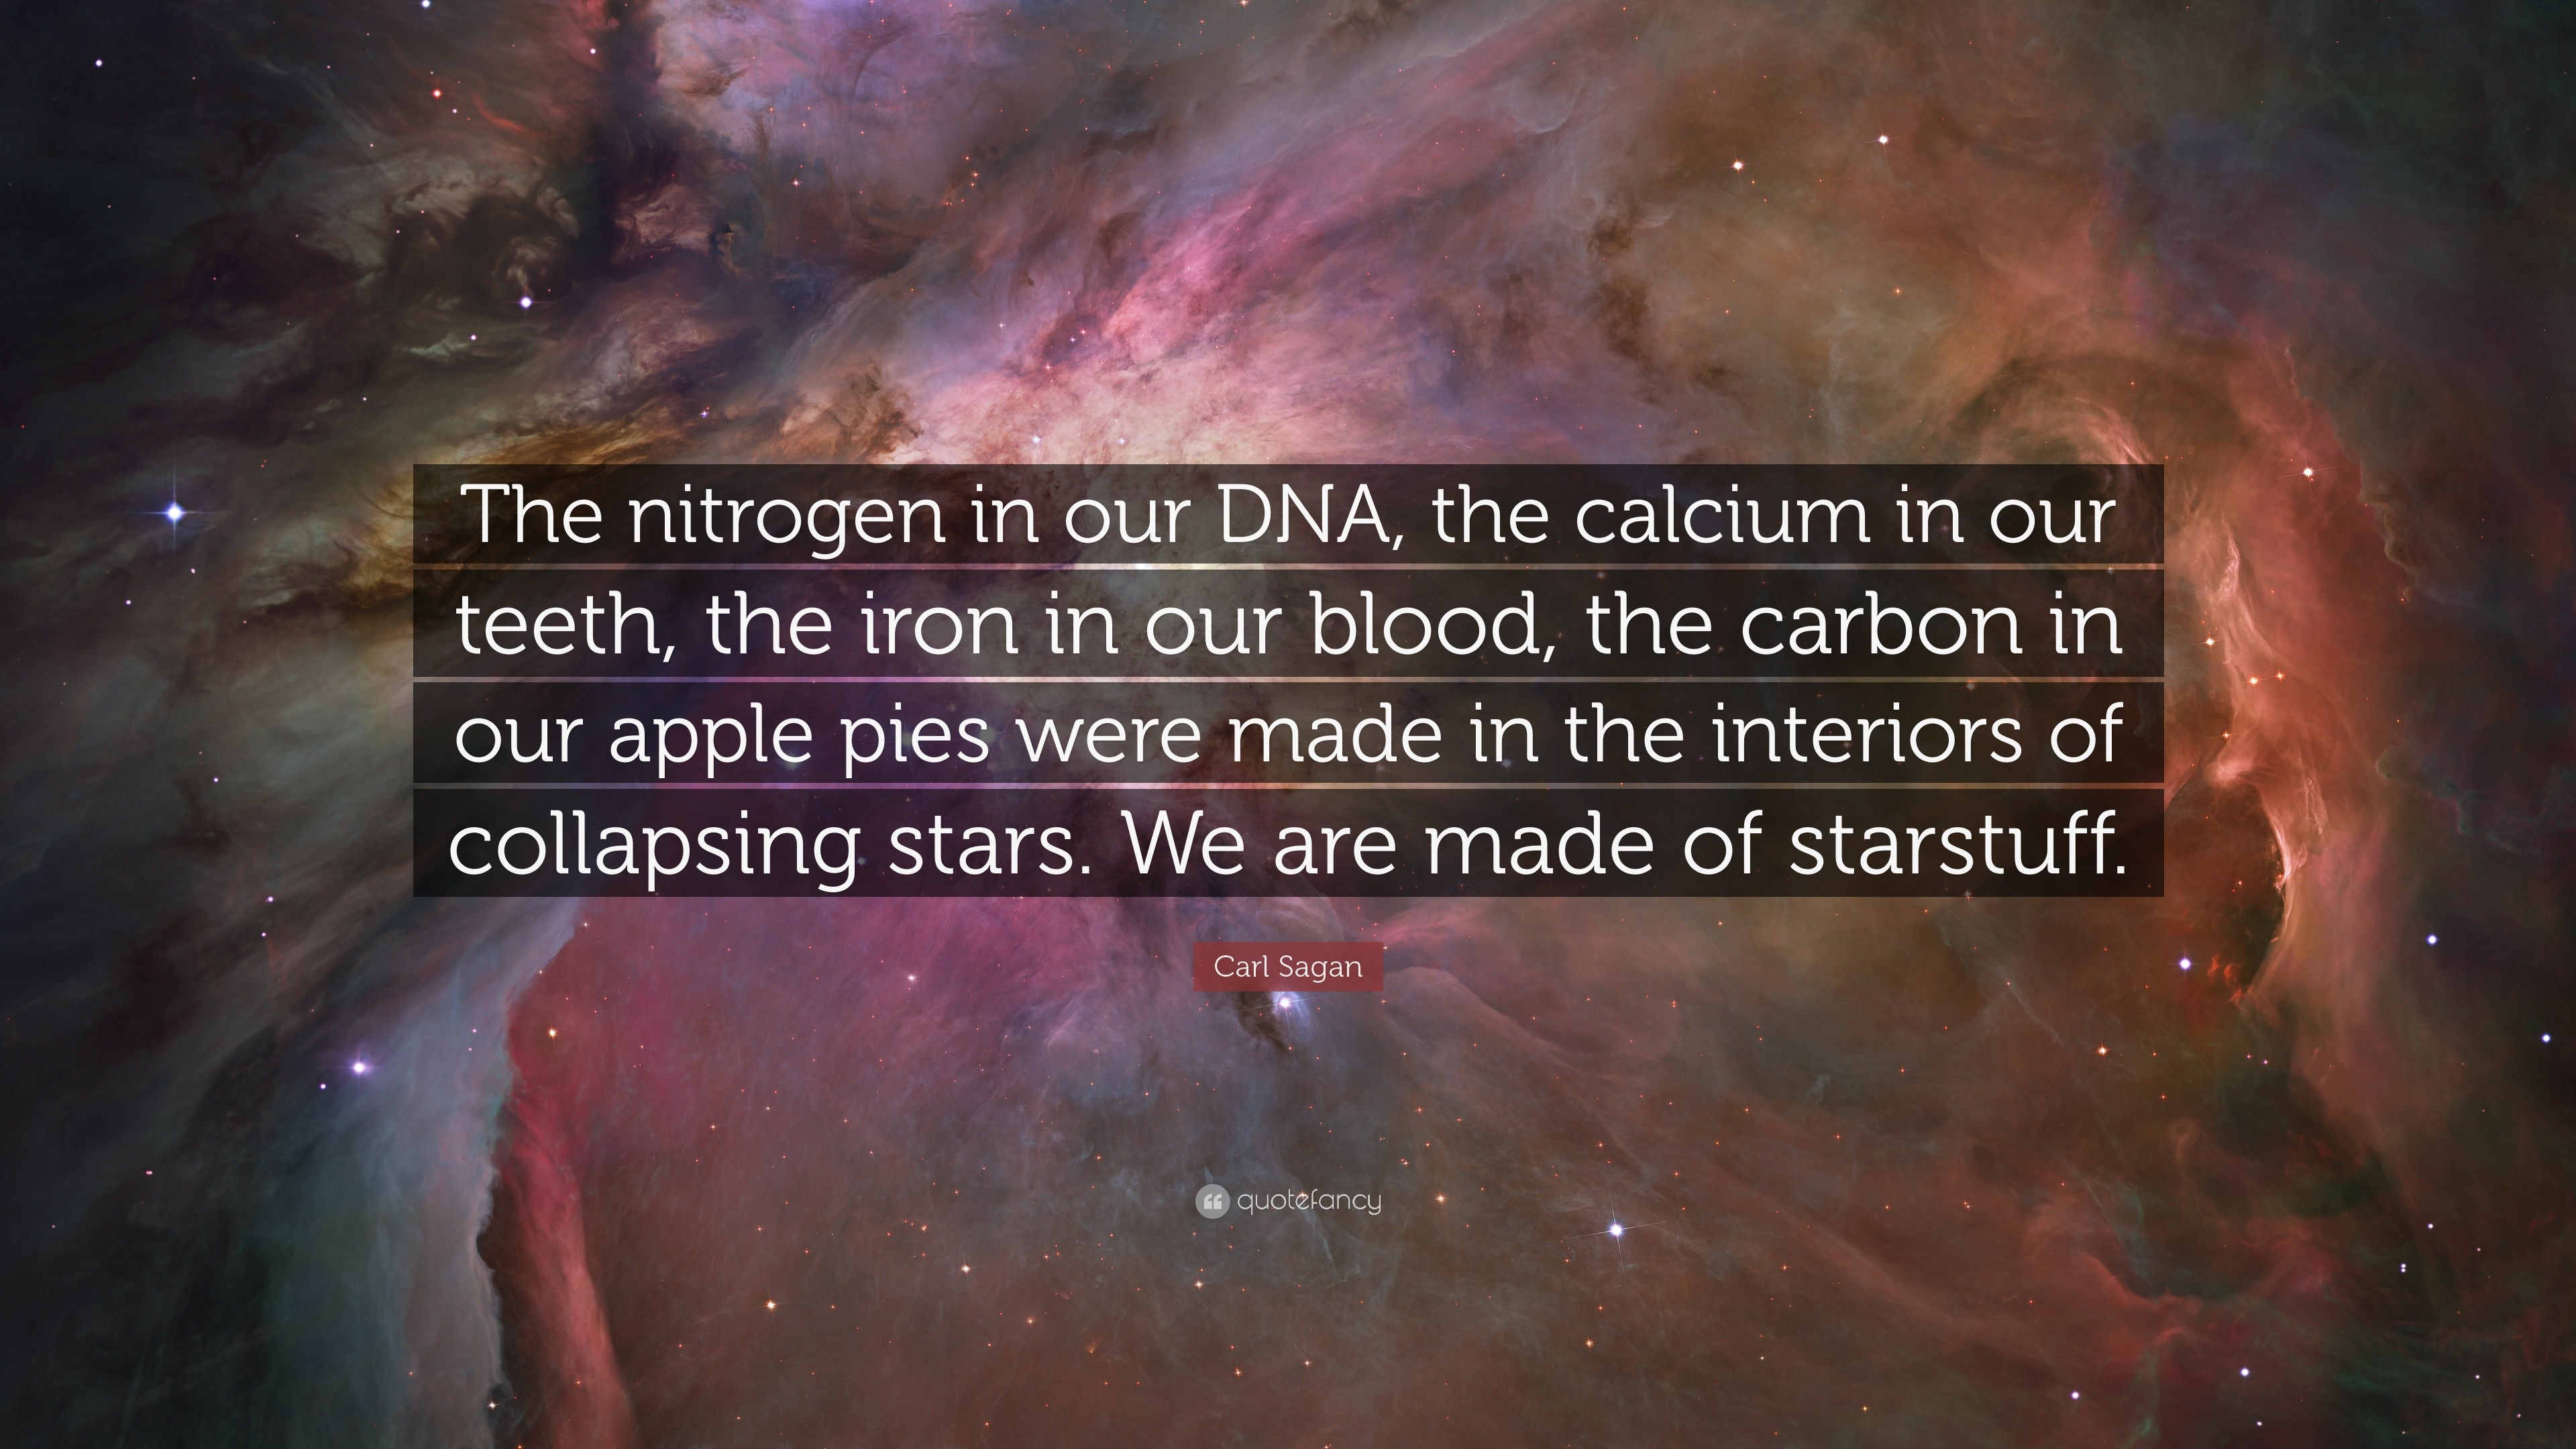 Carl Sagan Quote: “The nitrogen in our DNA, the calcium in our teeth